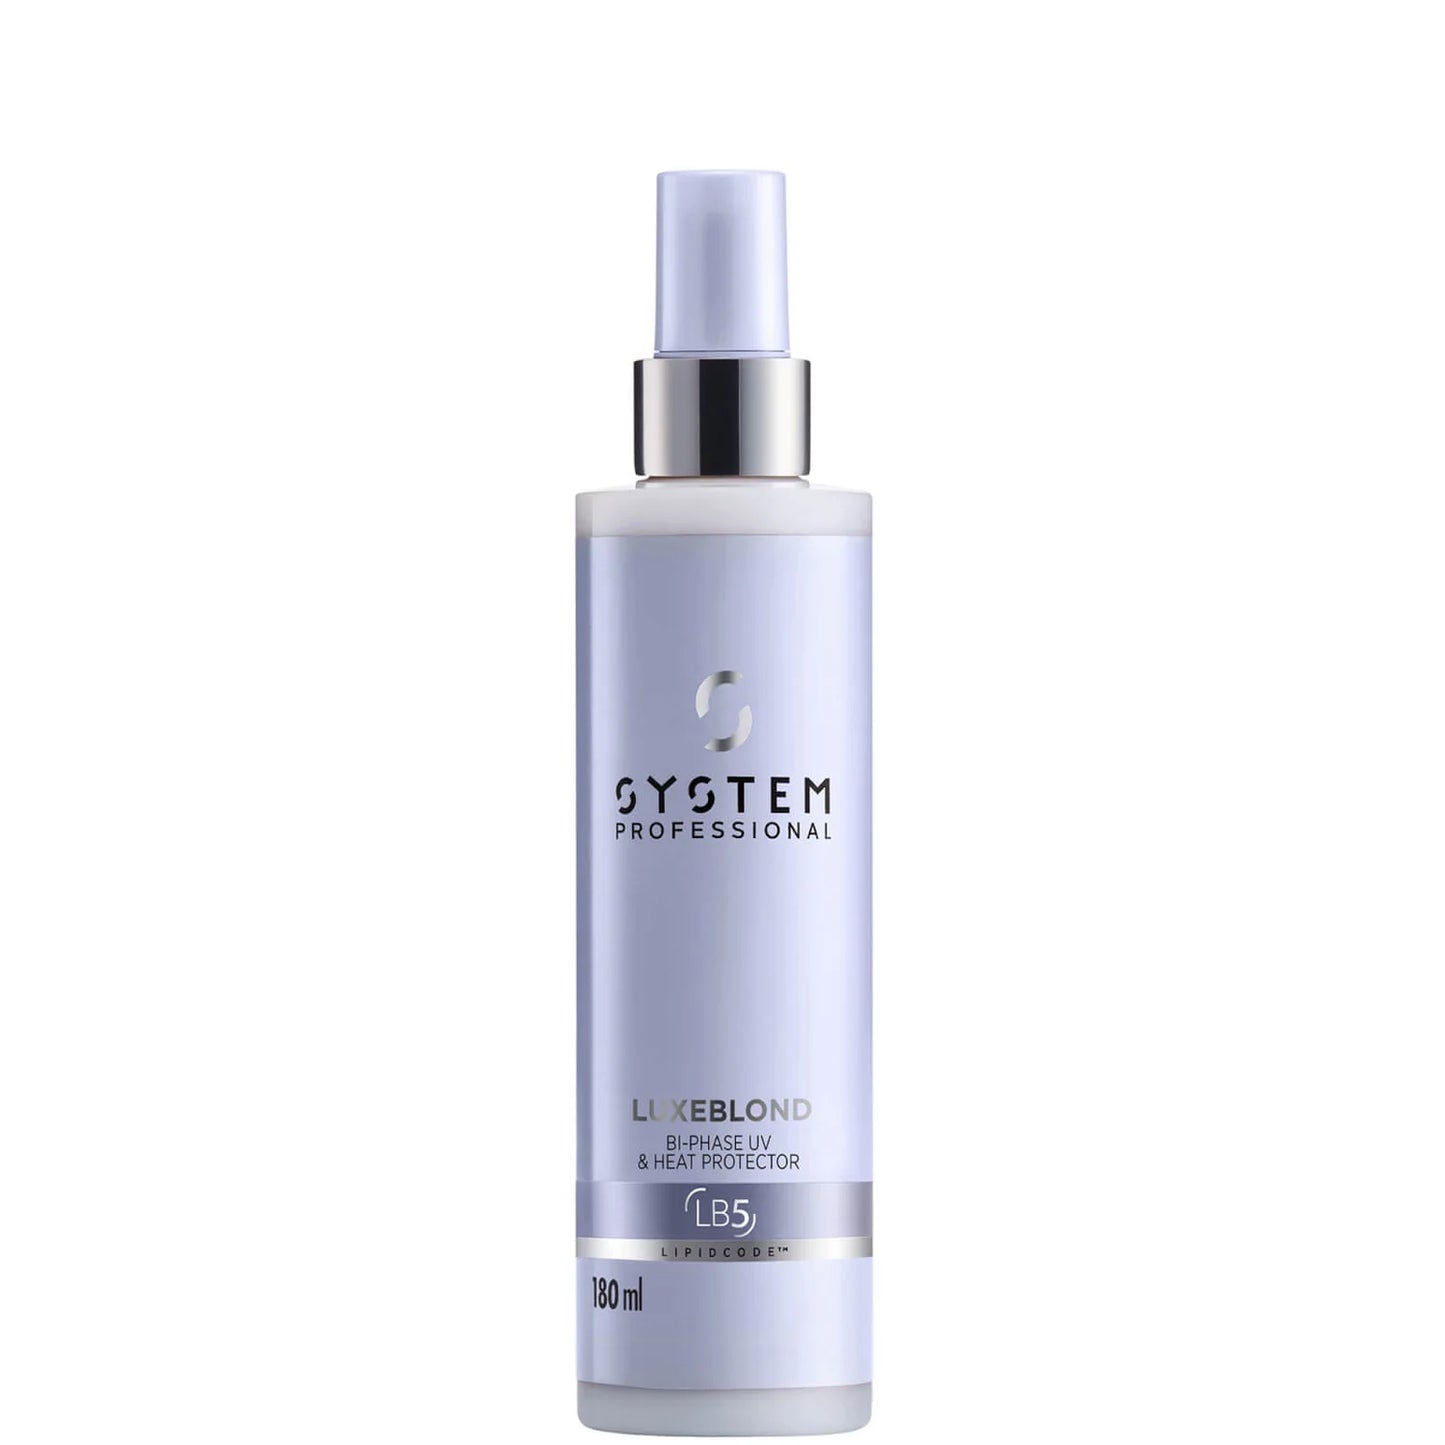 SYSTEM PROFESSIONAL - Luxe Blond Bi-Phase UV & Heat Protector 180ml